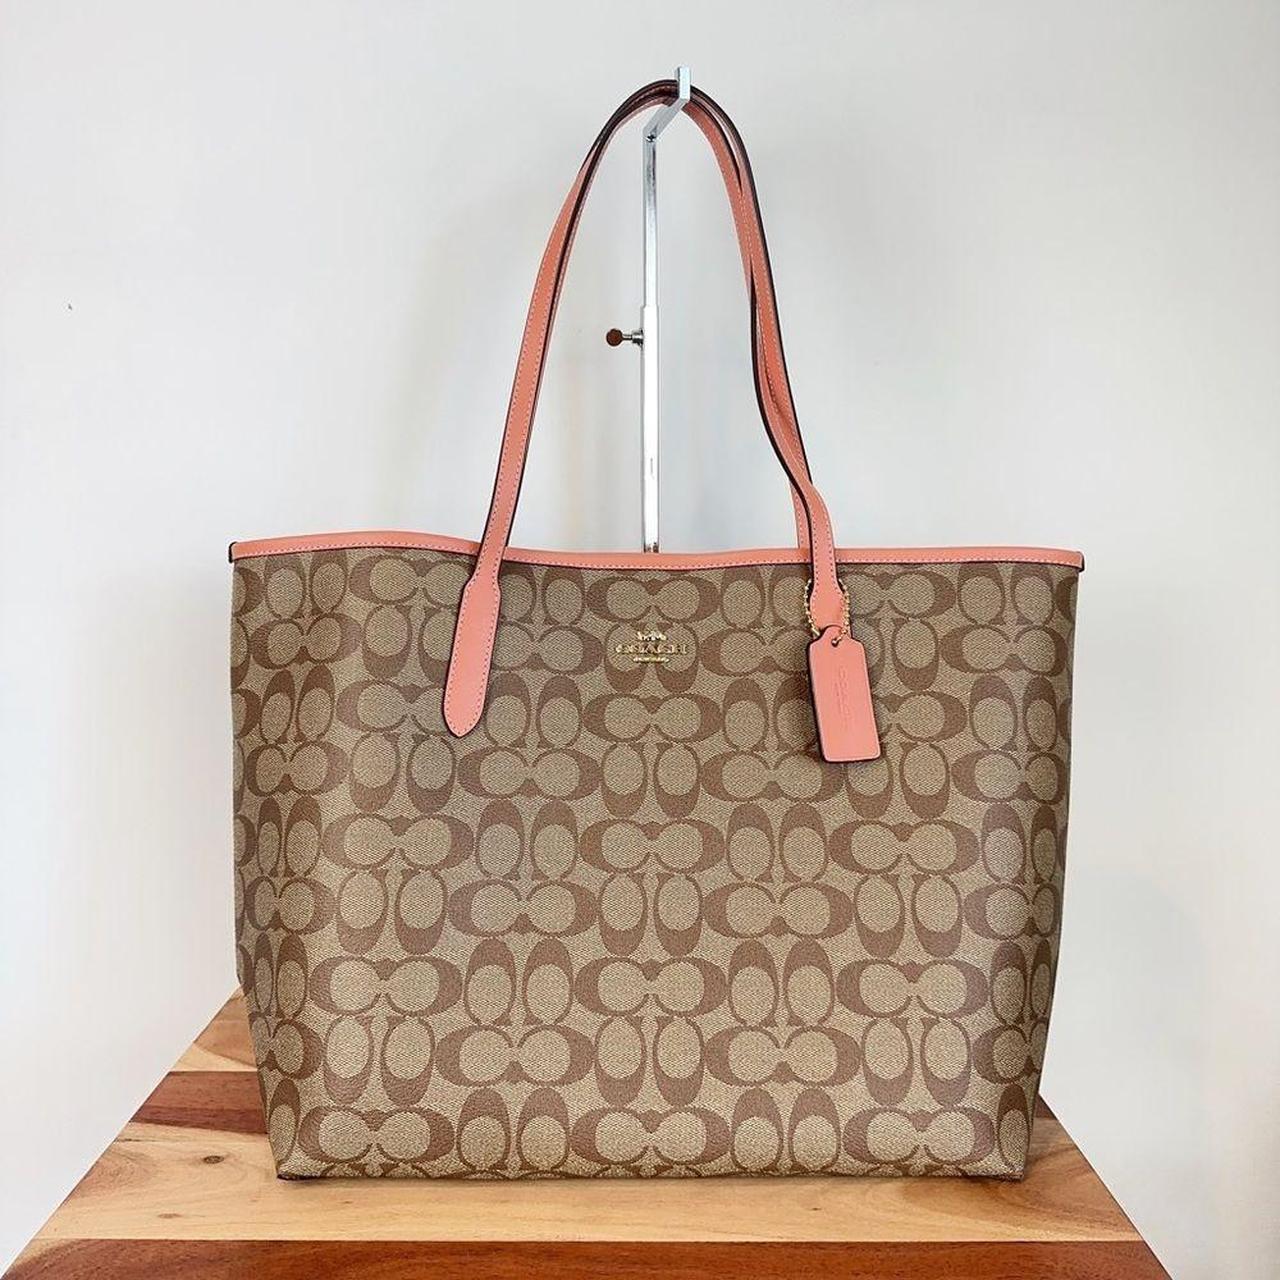 NWT Coach City Tote In Signature Canvas Color - Depop